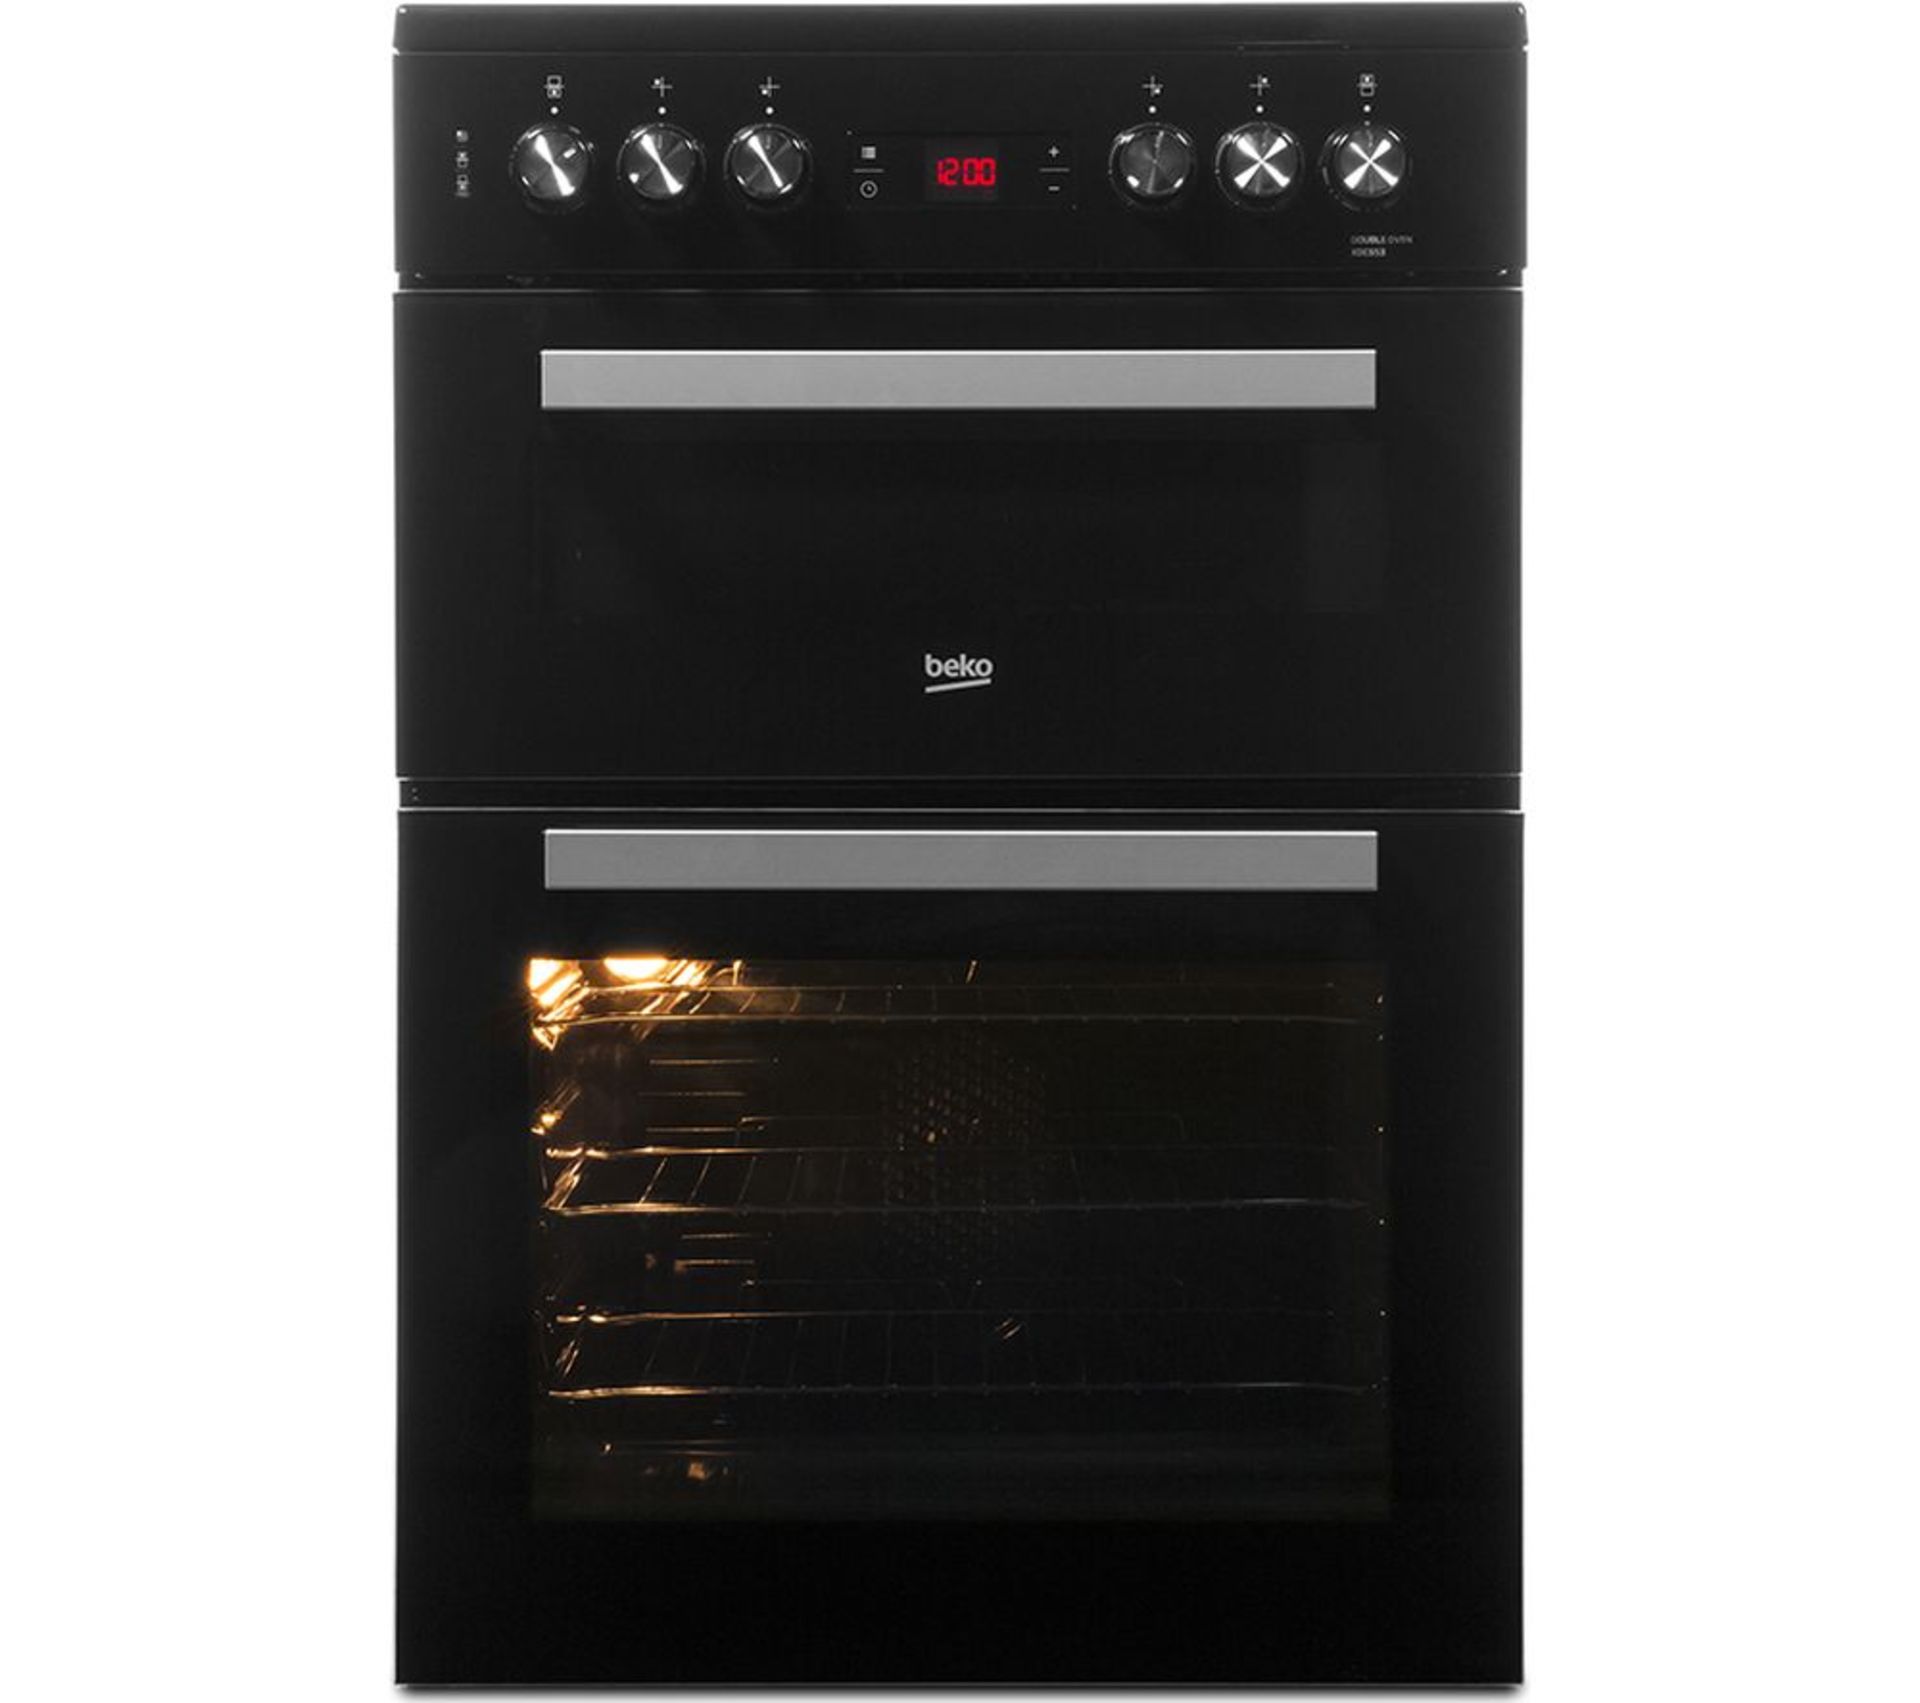 BEKO 60 cm Electric Ceramic Cooker Black & Silver XDC653K RRP ??389.00 - This item looks to be in